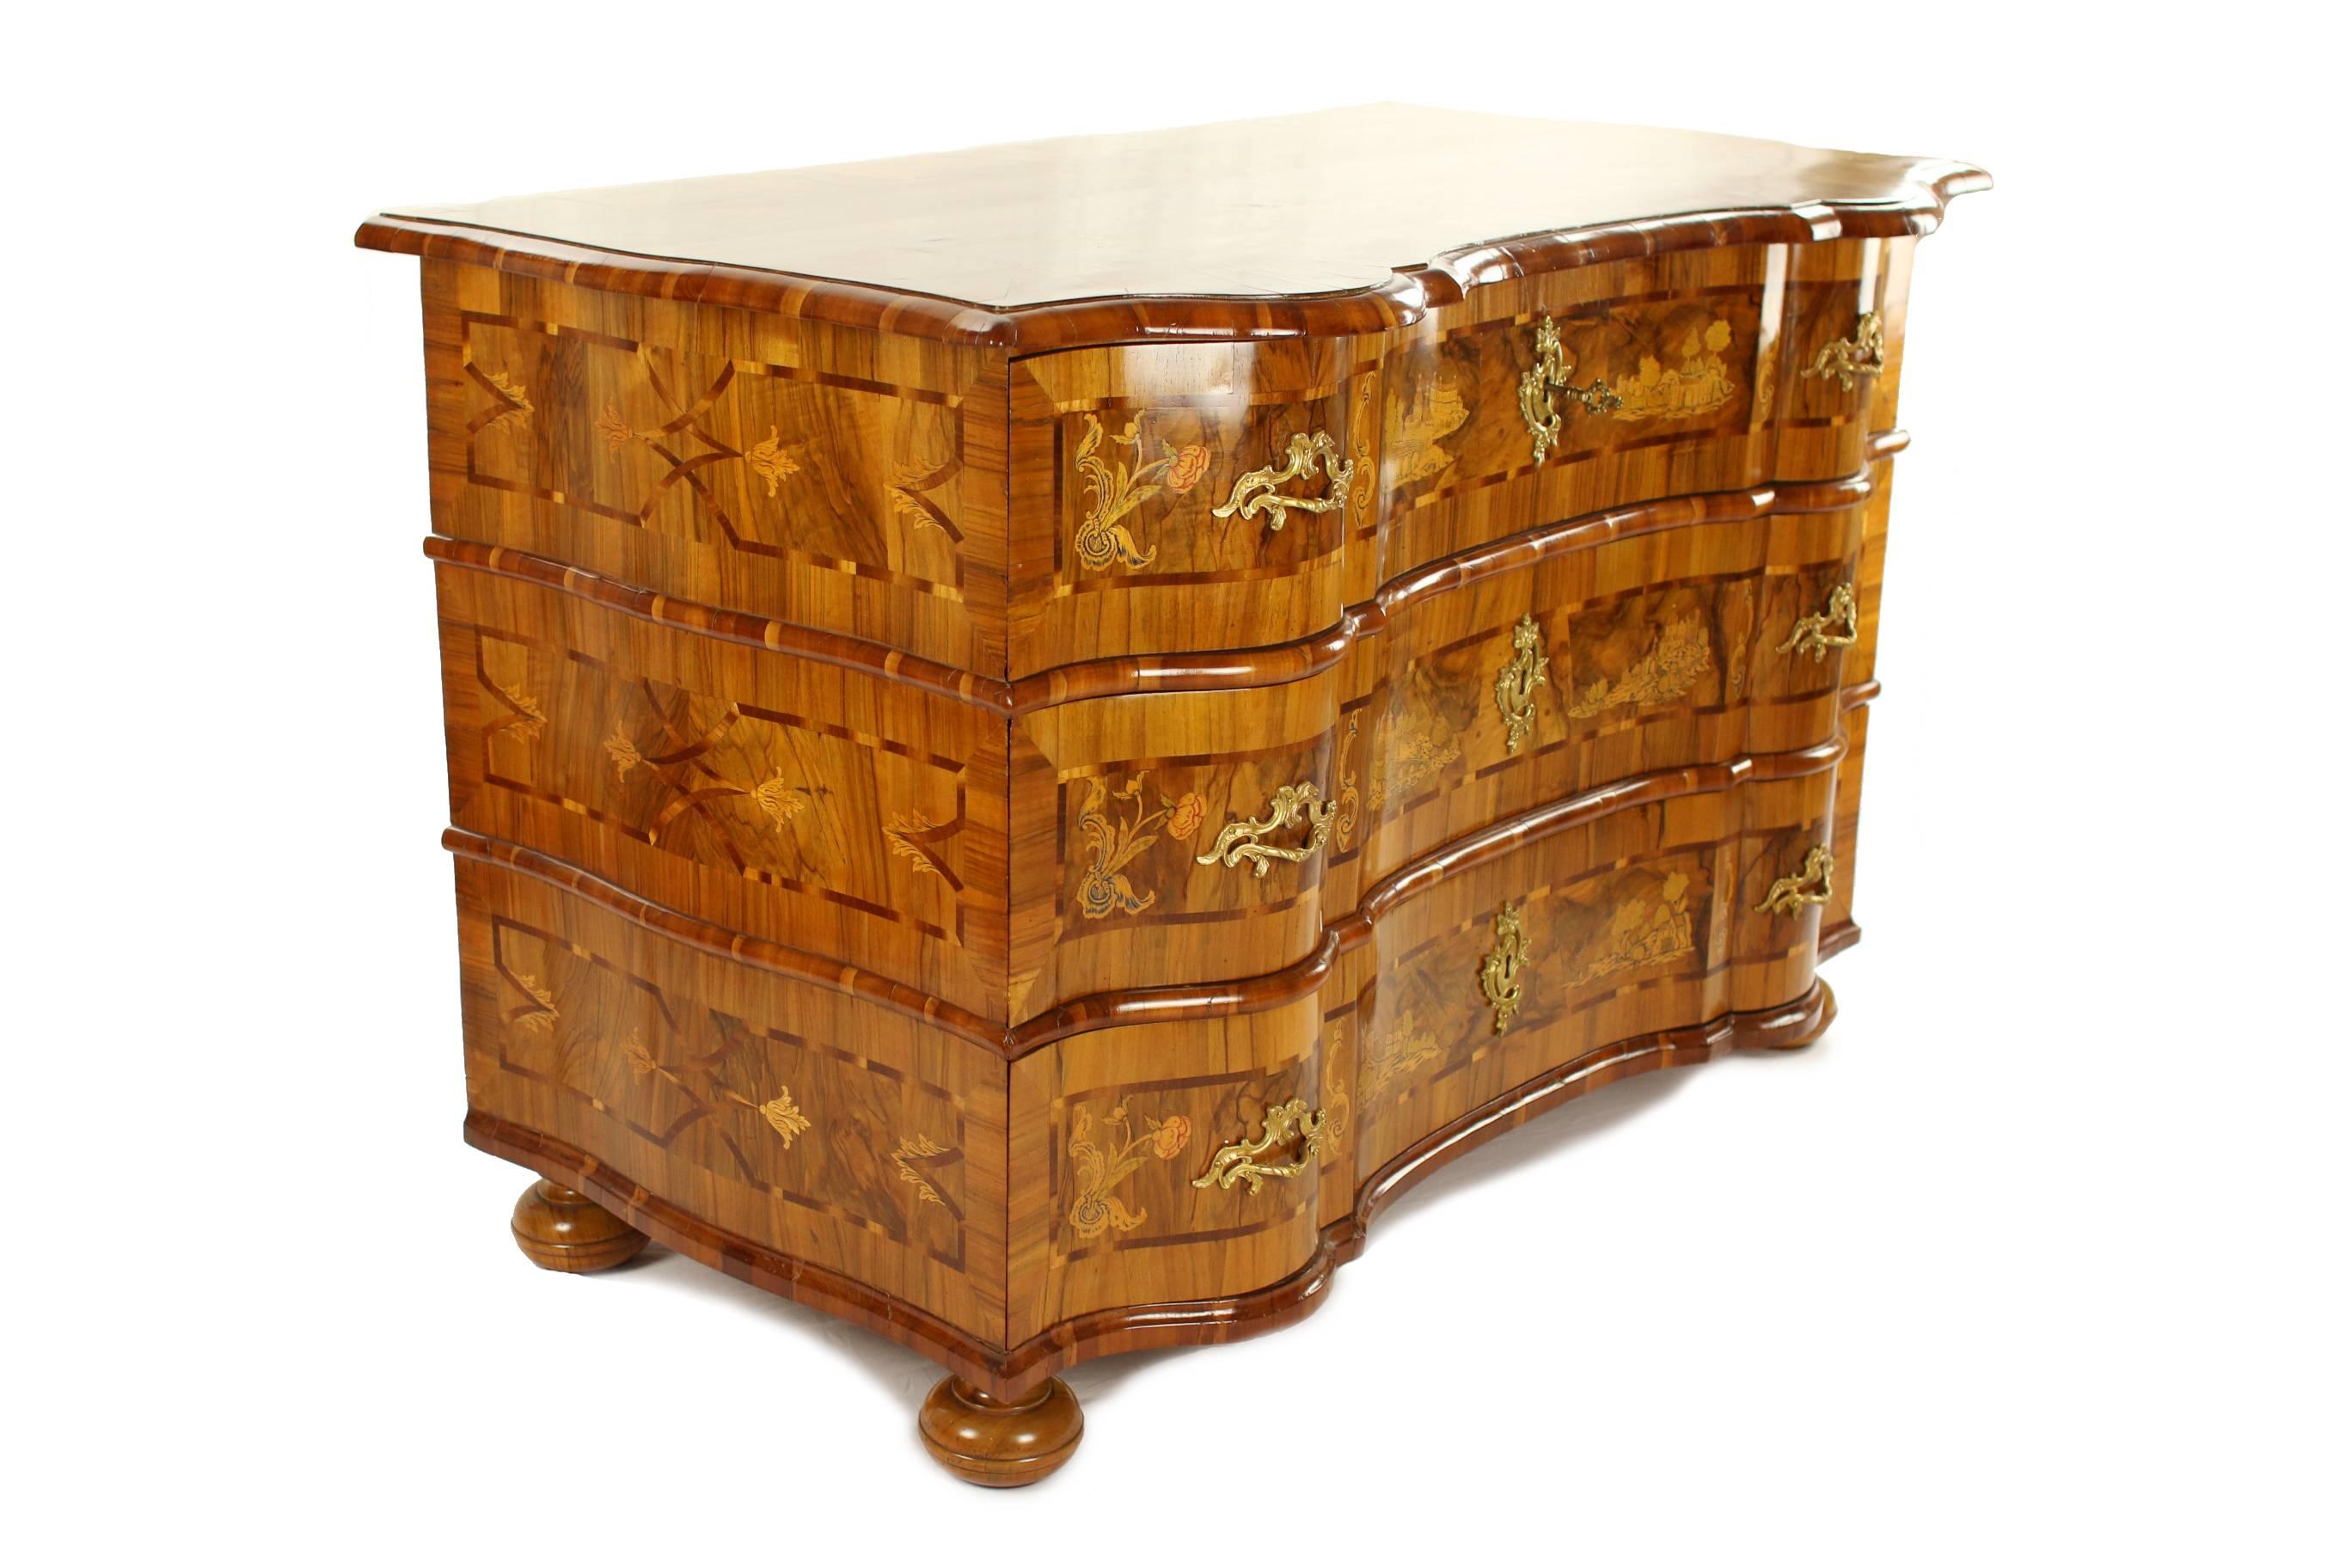 Baroque chest of drawers.
Erfurt, circa 1750.
Nut and nut root wood on softwood body veneered.
Three large drawers.
Twice embowed body with scenery inlaid works.
Original locks.
Restored residential-ready state.
Measures:- Height: 86 cm,